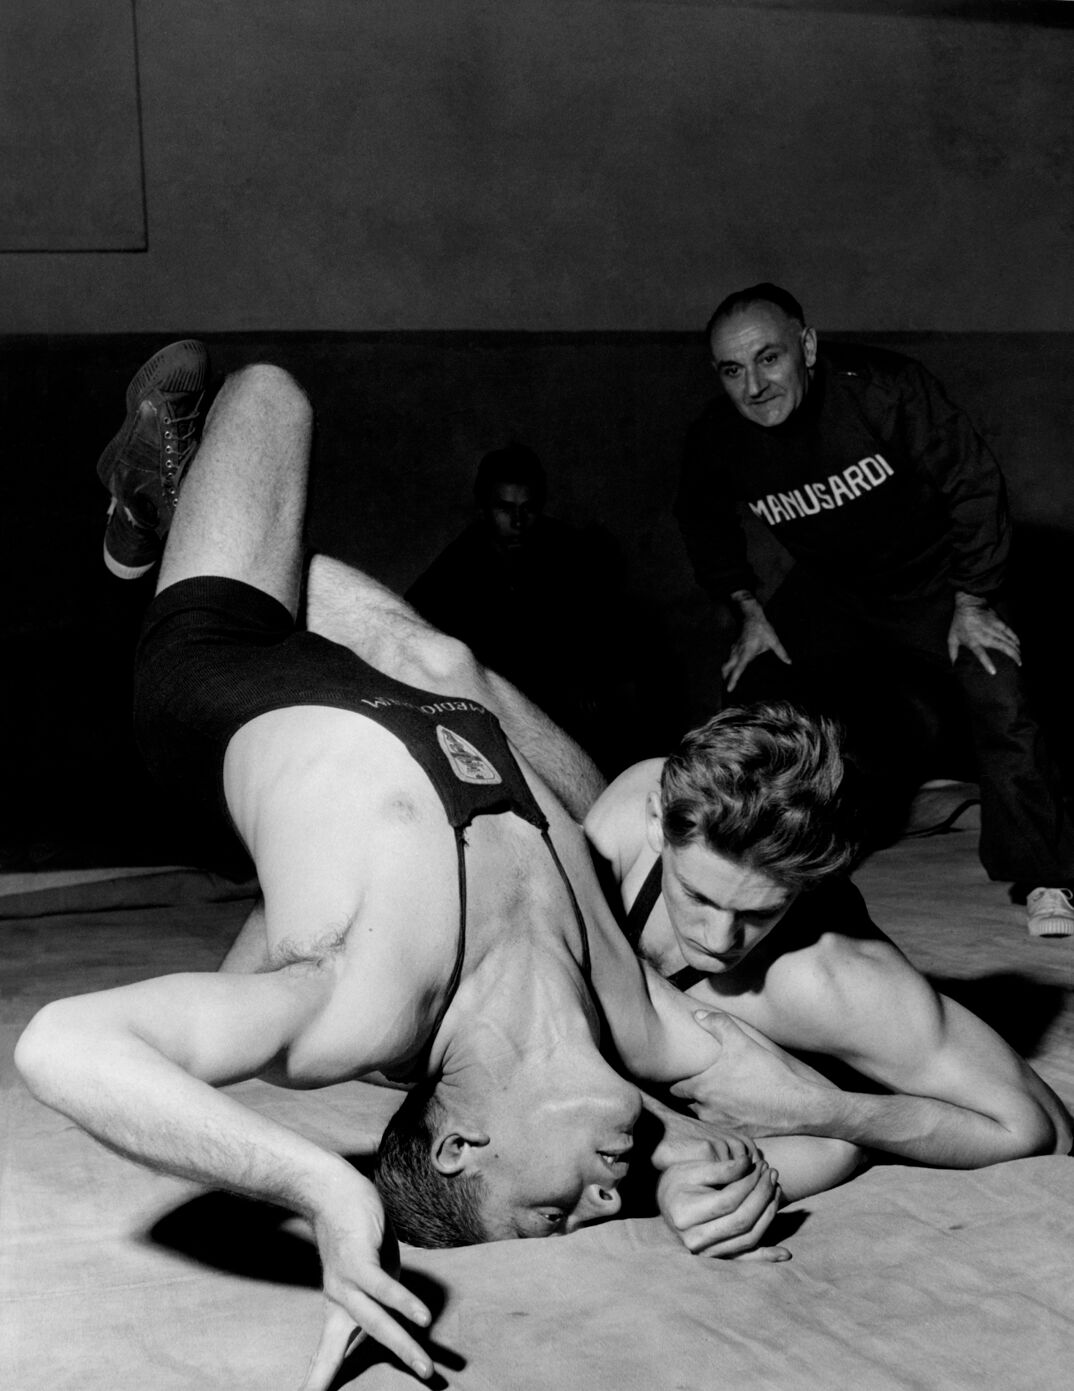 Black-and-white image. On a wrestling mat, two men in tight singlets wrestle with their legs intertwined. Both have blonde hair and muscular builds. Behind them, an older man in a black sweatshirt and sweatpants with a receding hairline watches.